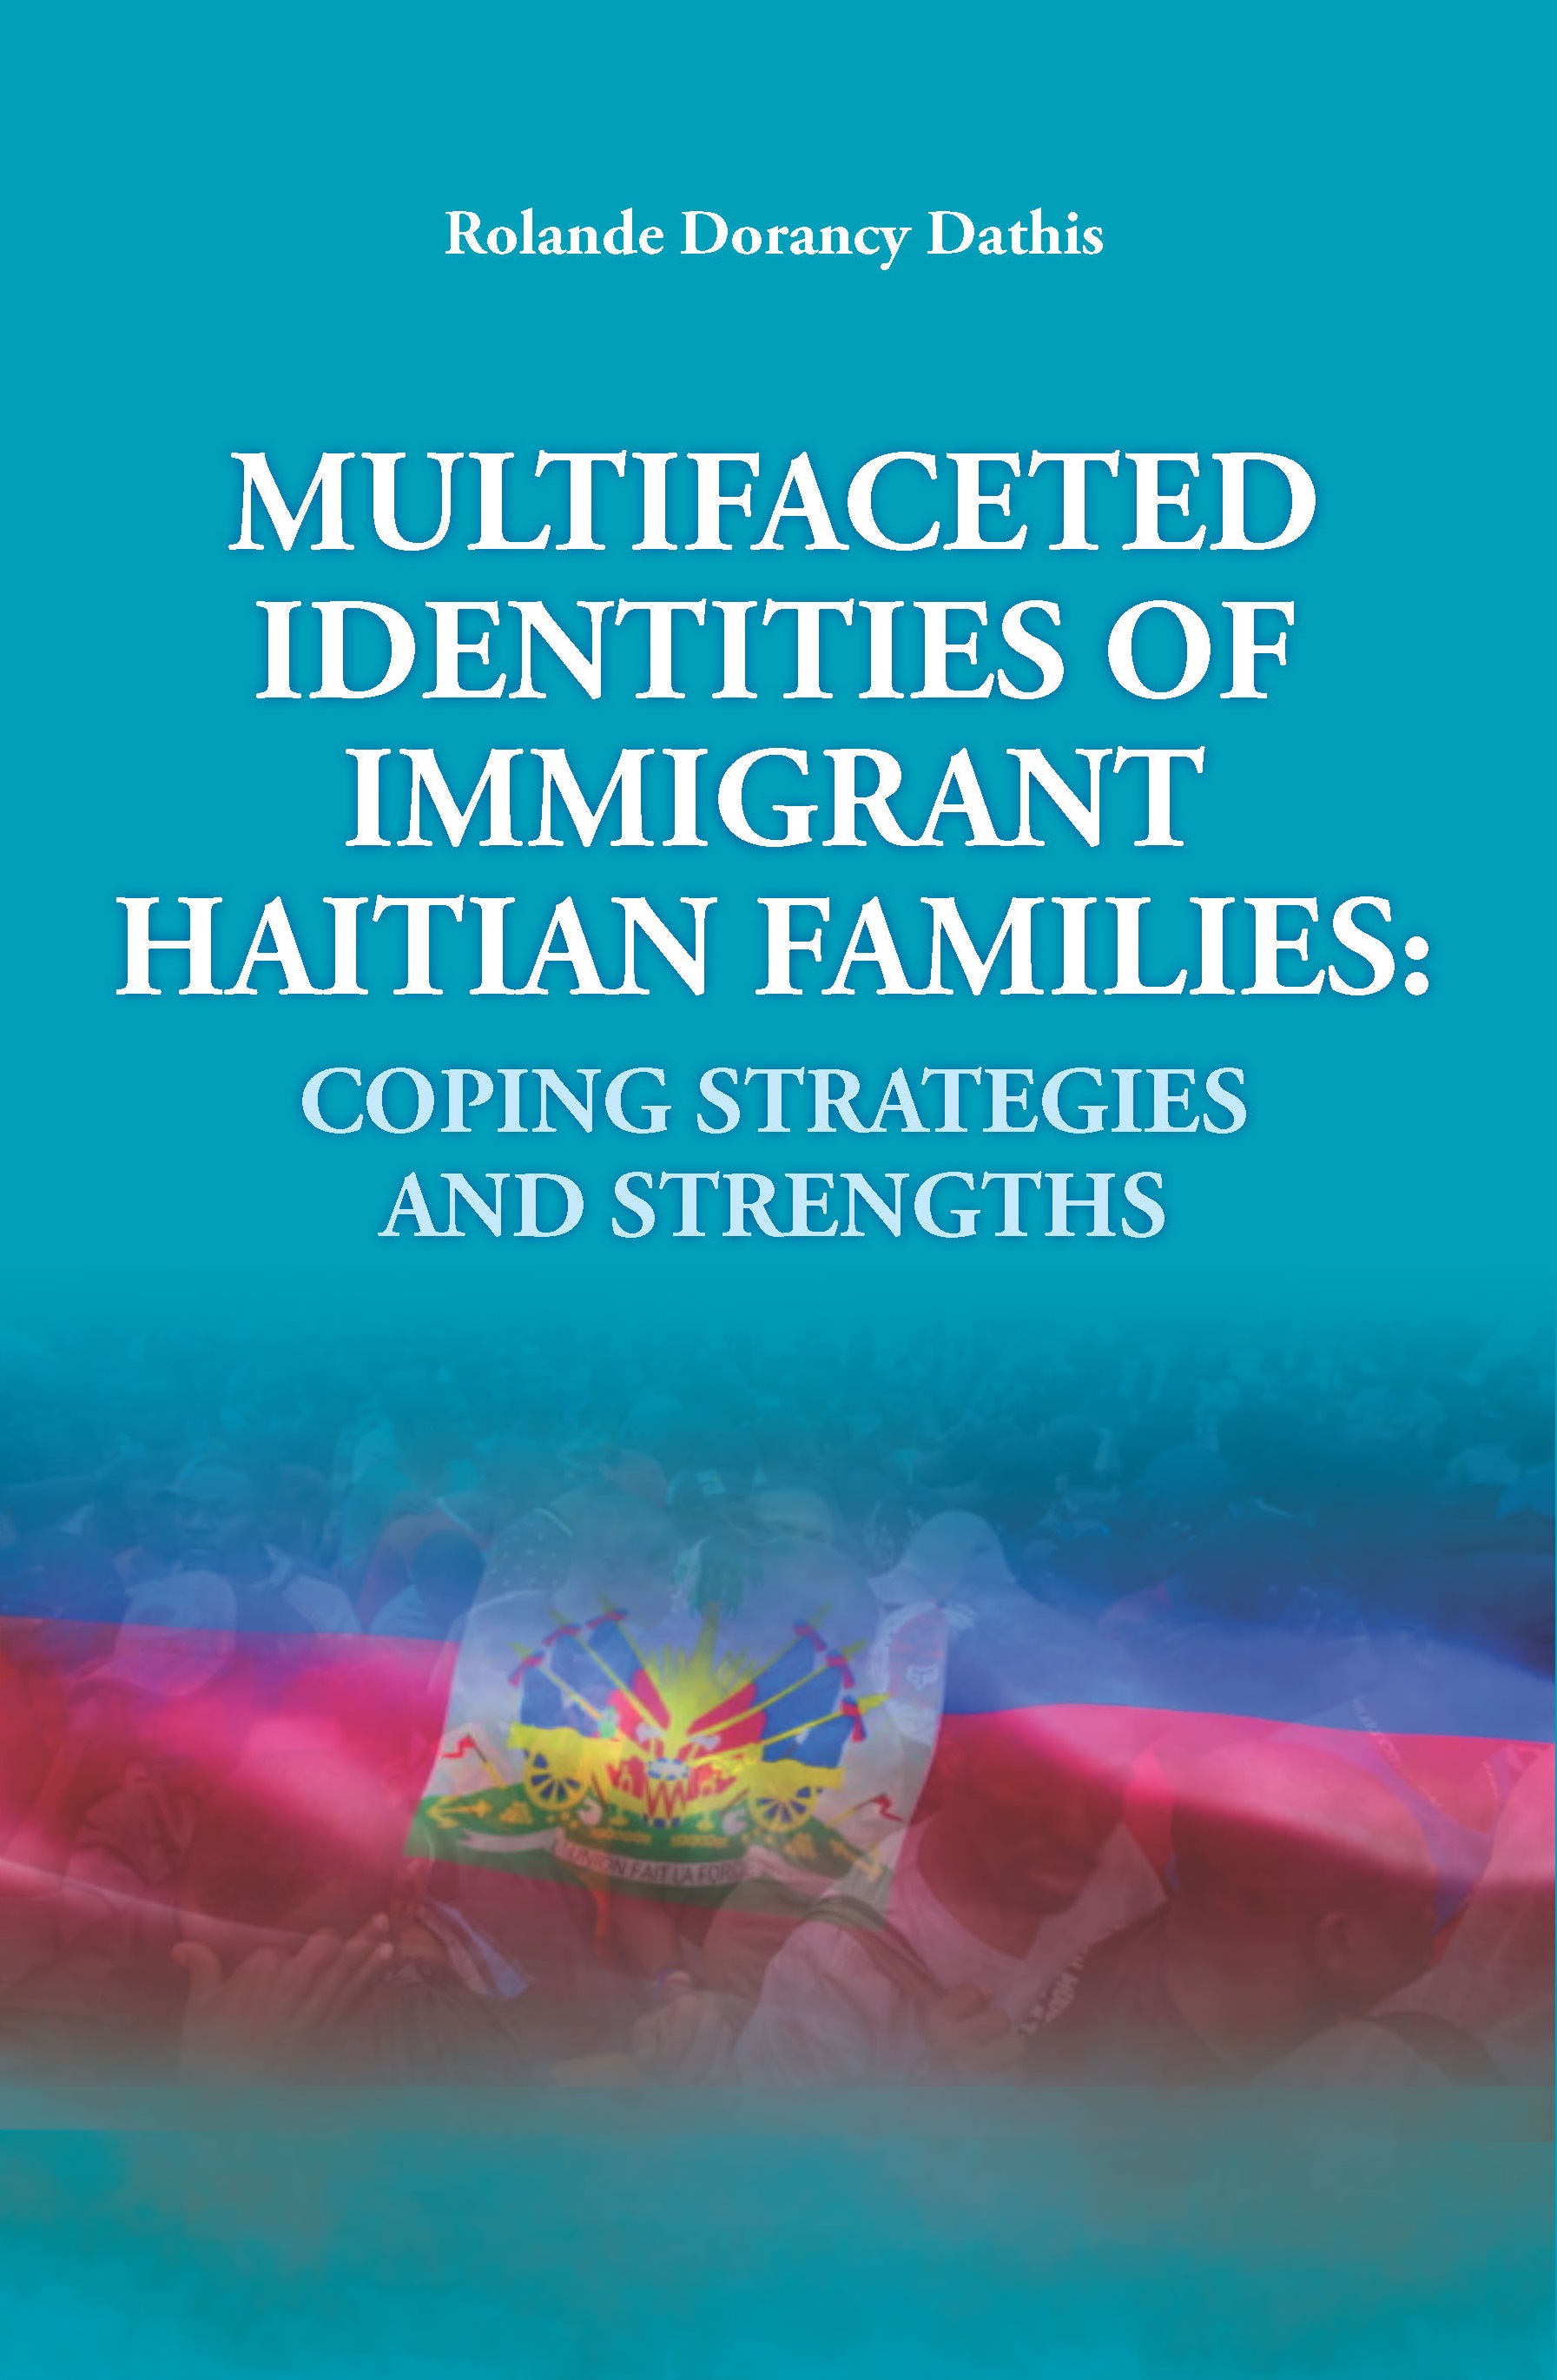 MULTIFACETED
IDENTITIES OF
IMMIGRANT
HAITIAN FAMILIES 
COPING STRATEGIES
AND STRENGTHS